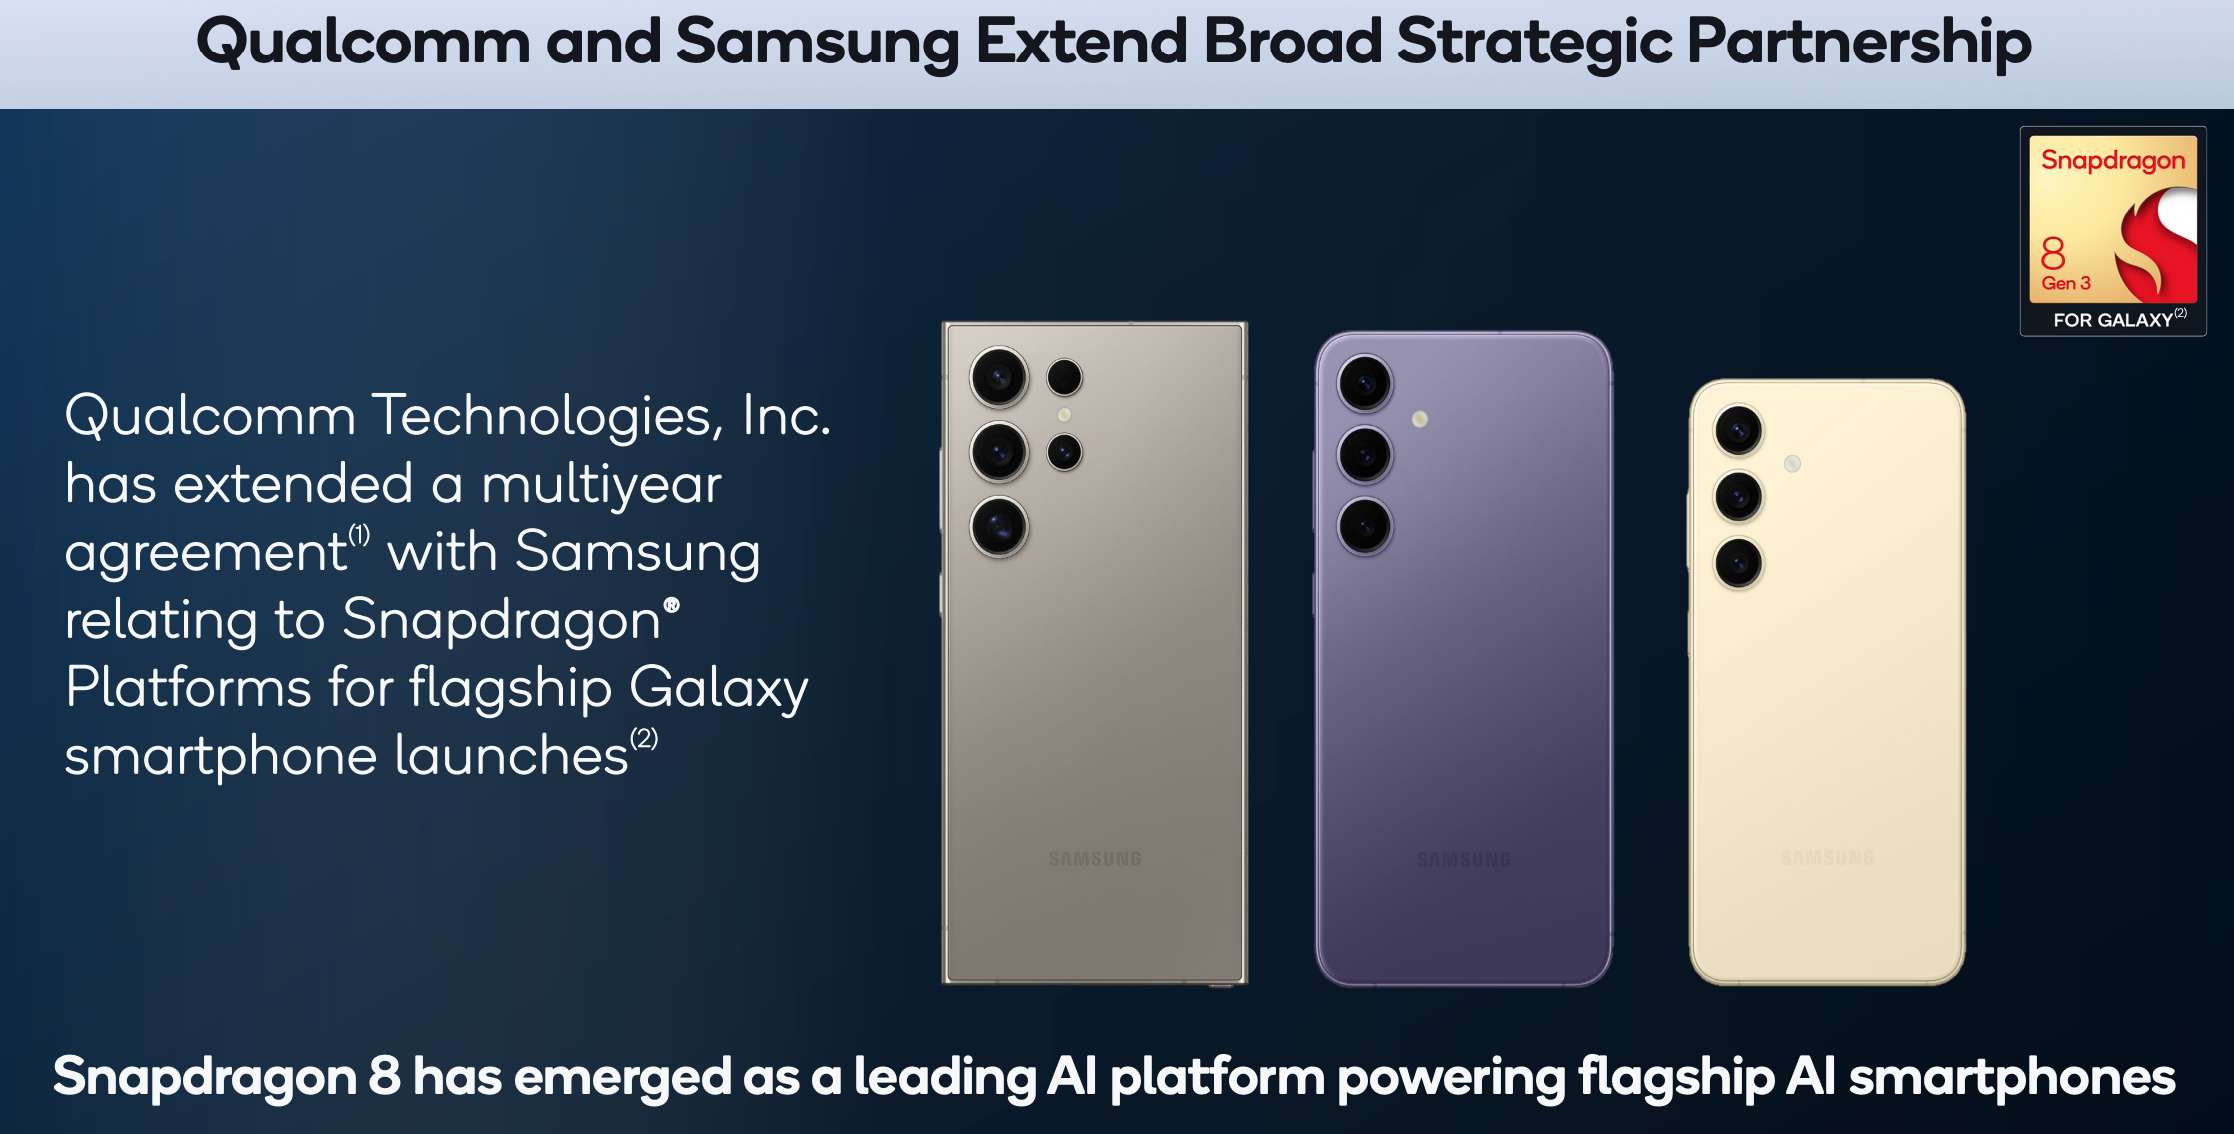 Image Credit–Qualcomm - Qualcomm reports $9.9 billion in revenue and extended deals with both Samsung and Apple